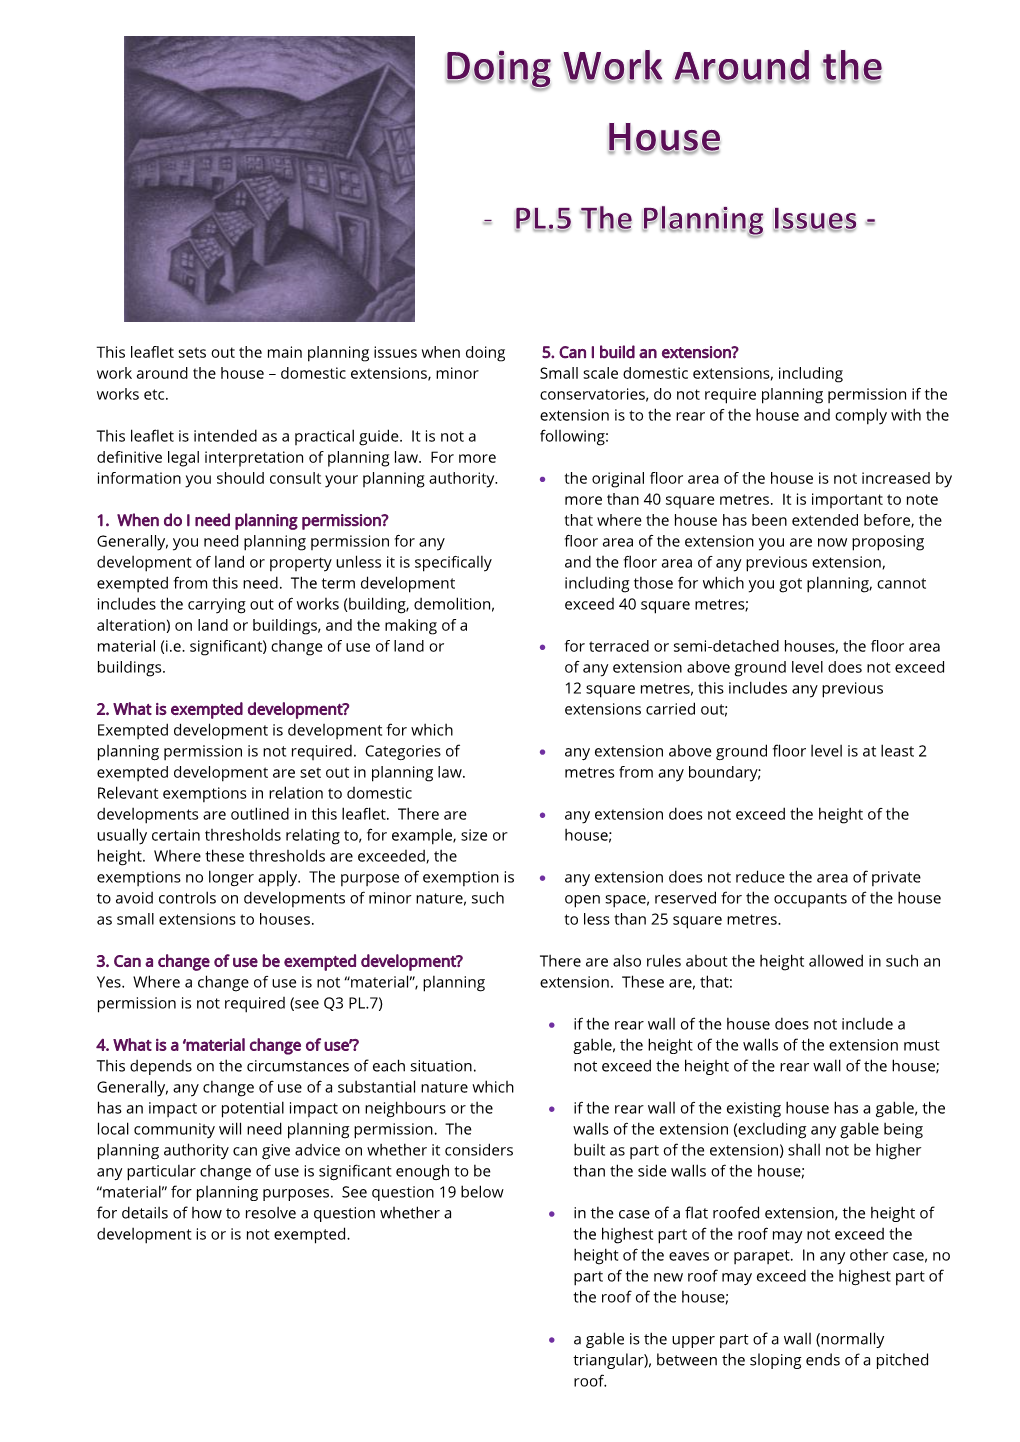 This Leaflet Sets out the Main Planning Issues When Doing Work Around The